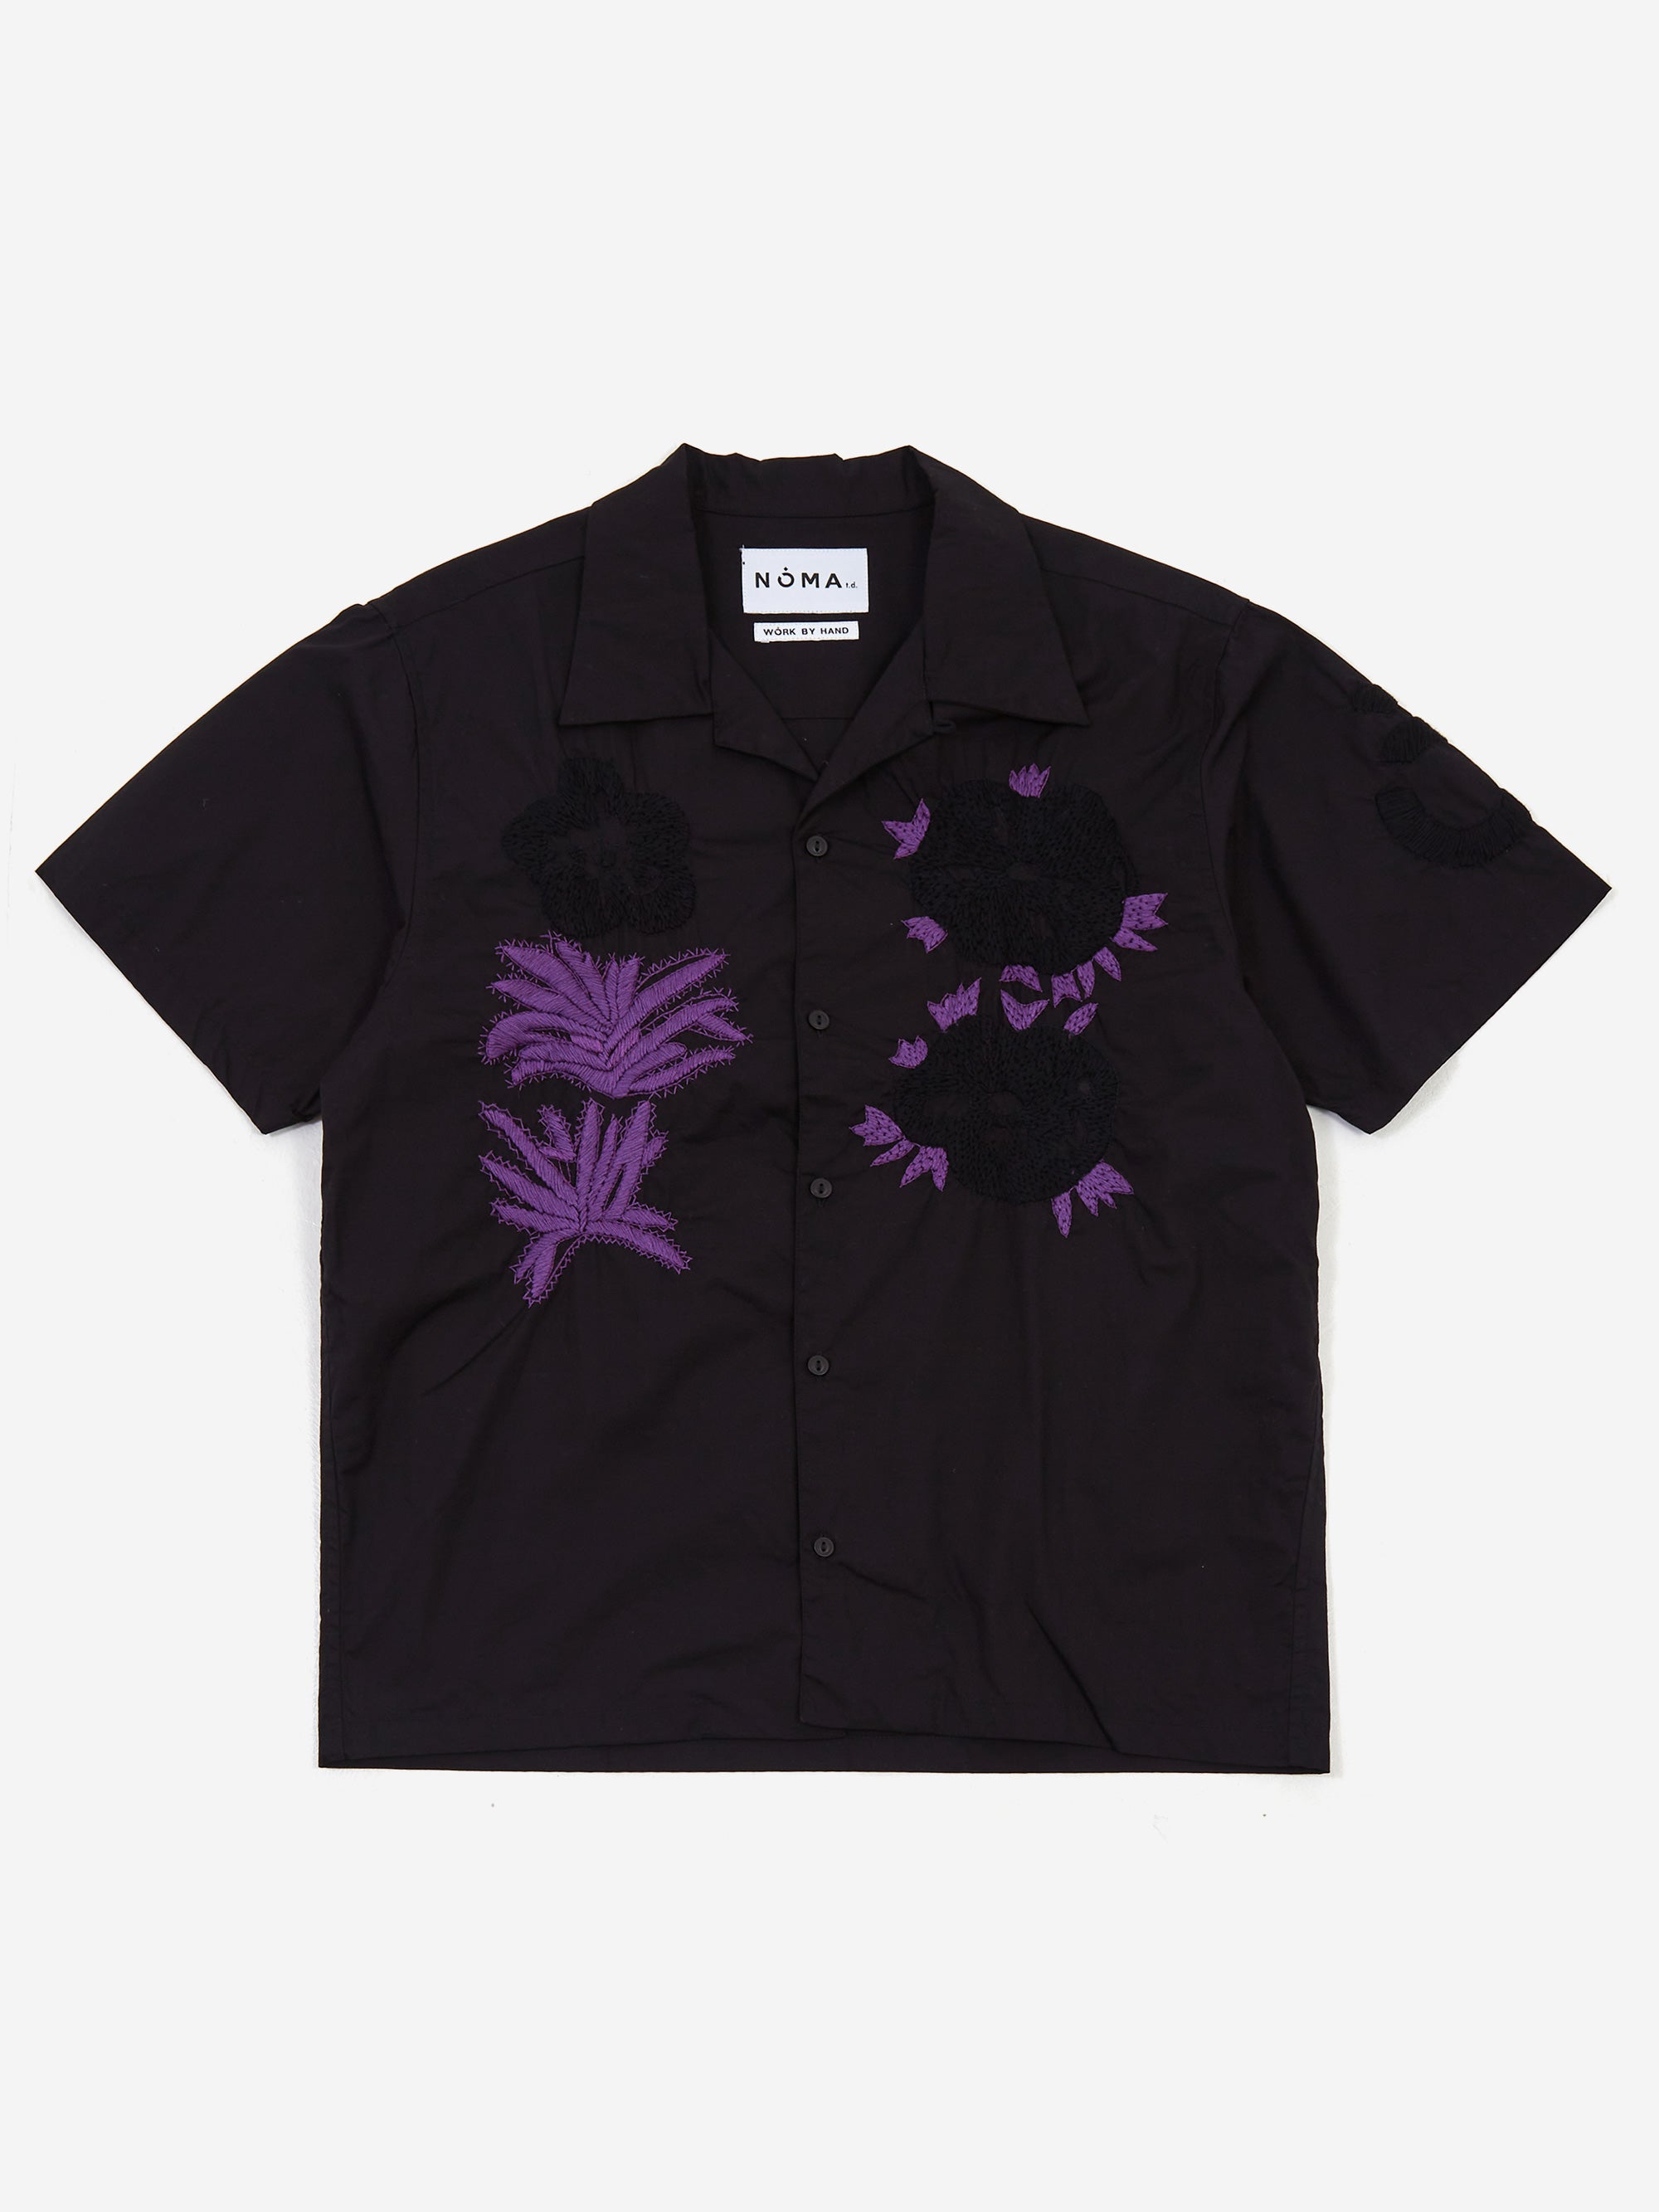 NOMA t.d. Flower & Cactus Hand Embroidery Shirt - Black